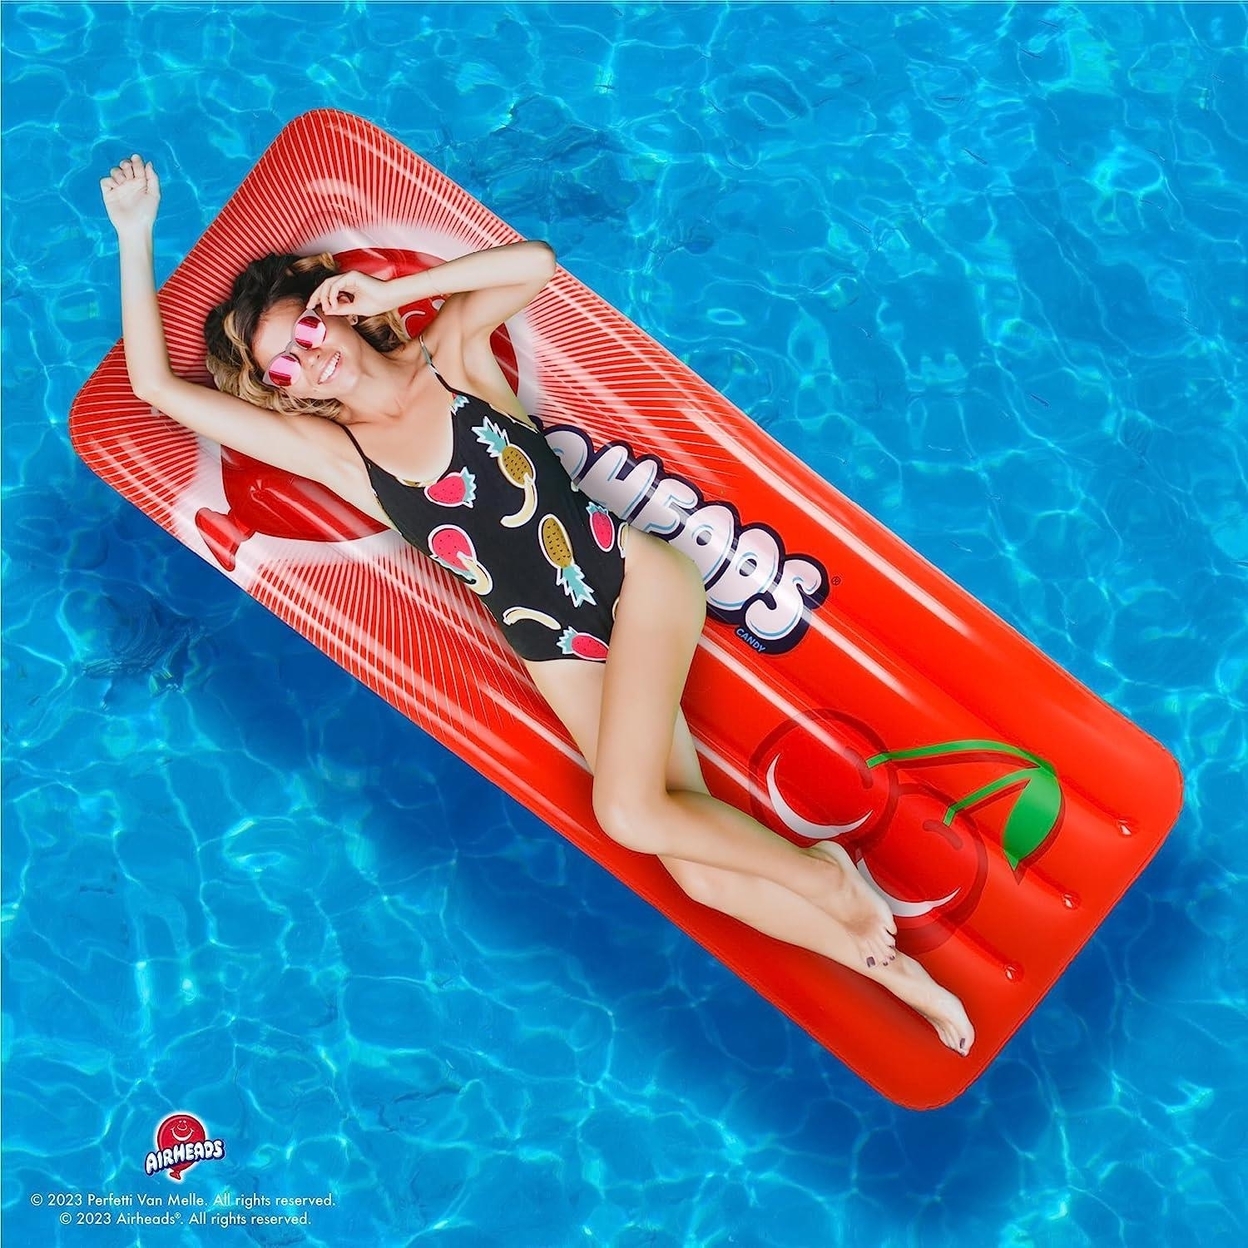 Airheads Red Cherry Inflatable Pool Float 67 Candy Theme Water Raft Mighty Mojo